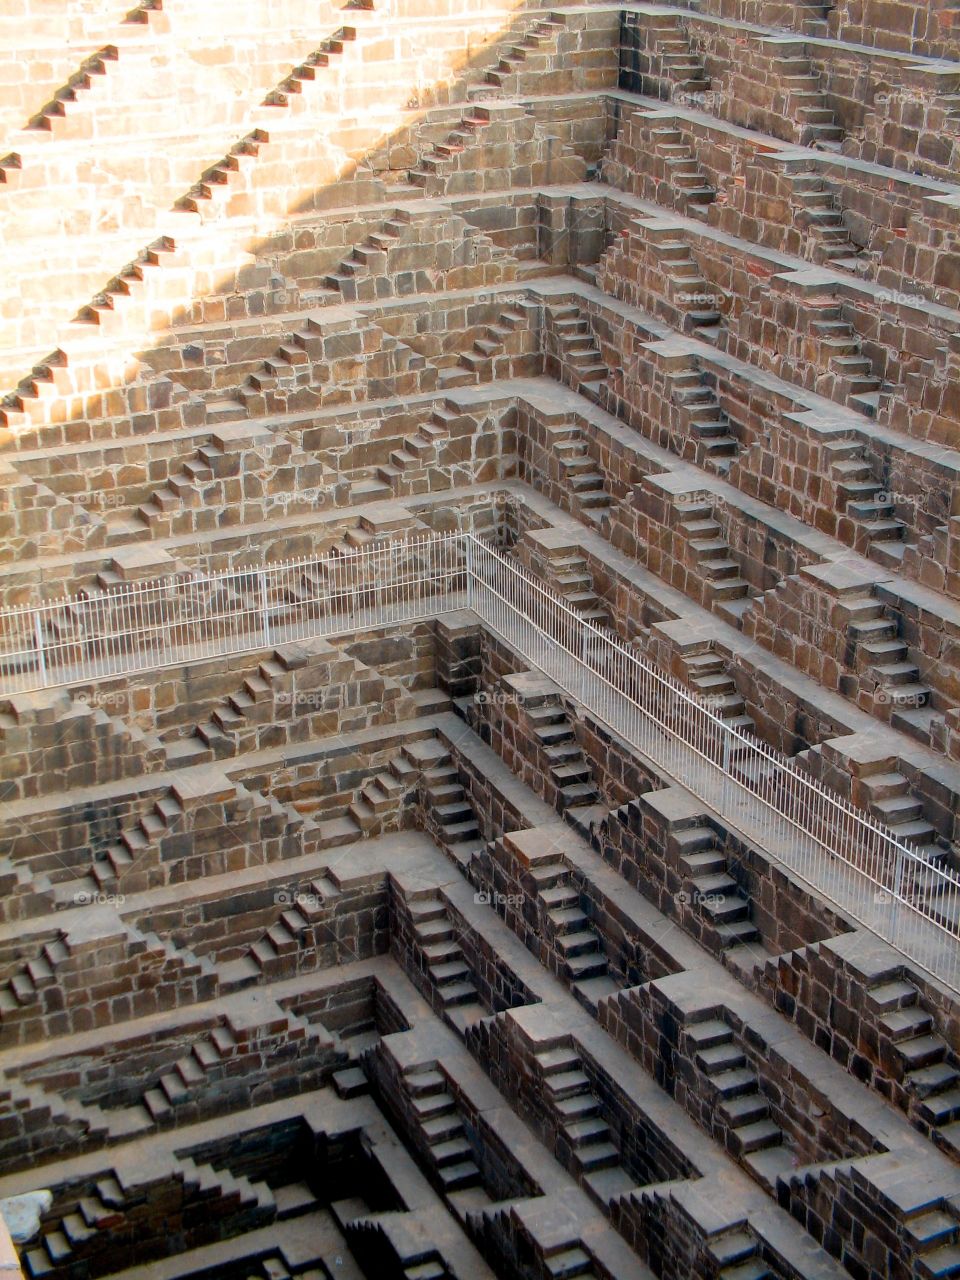 Step well in India. Step well in India